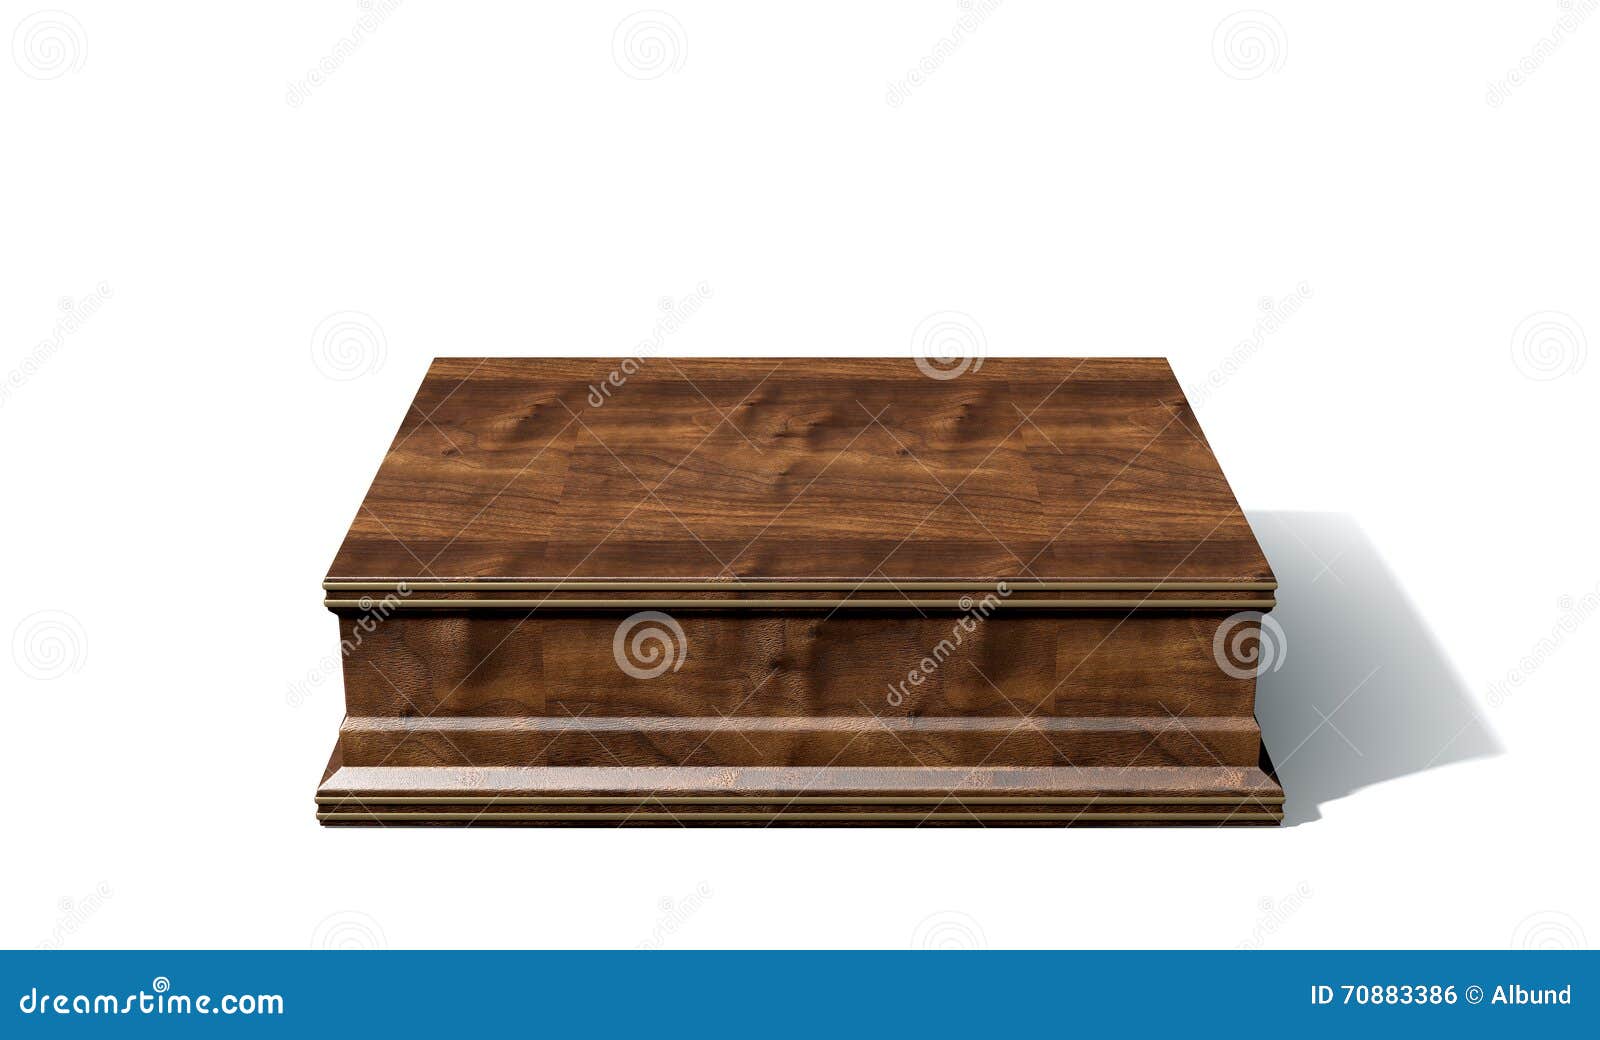 Trophy Base stock photo. Image of wooden, medal, empty - 70883386